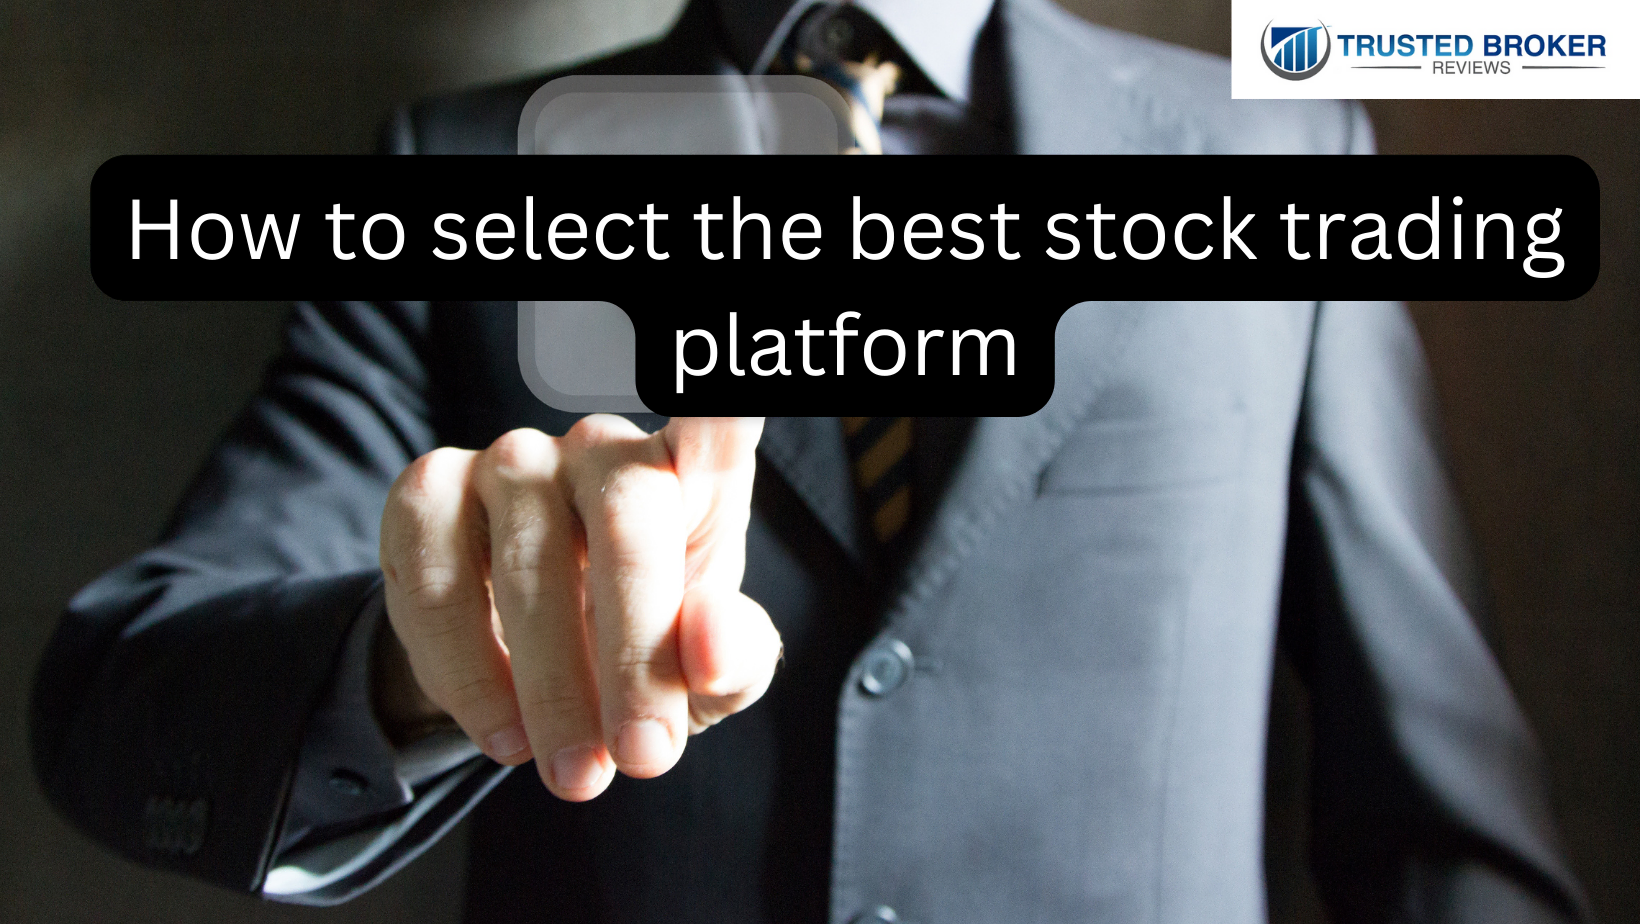 How to select the best stock trading platform